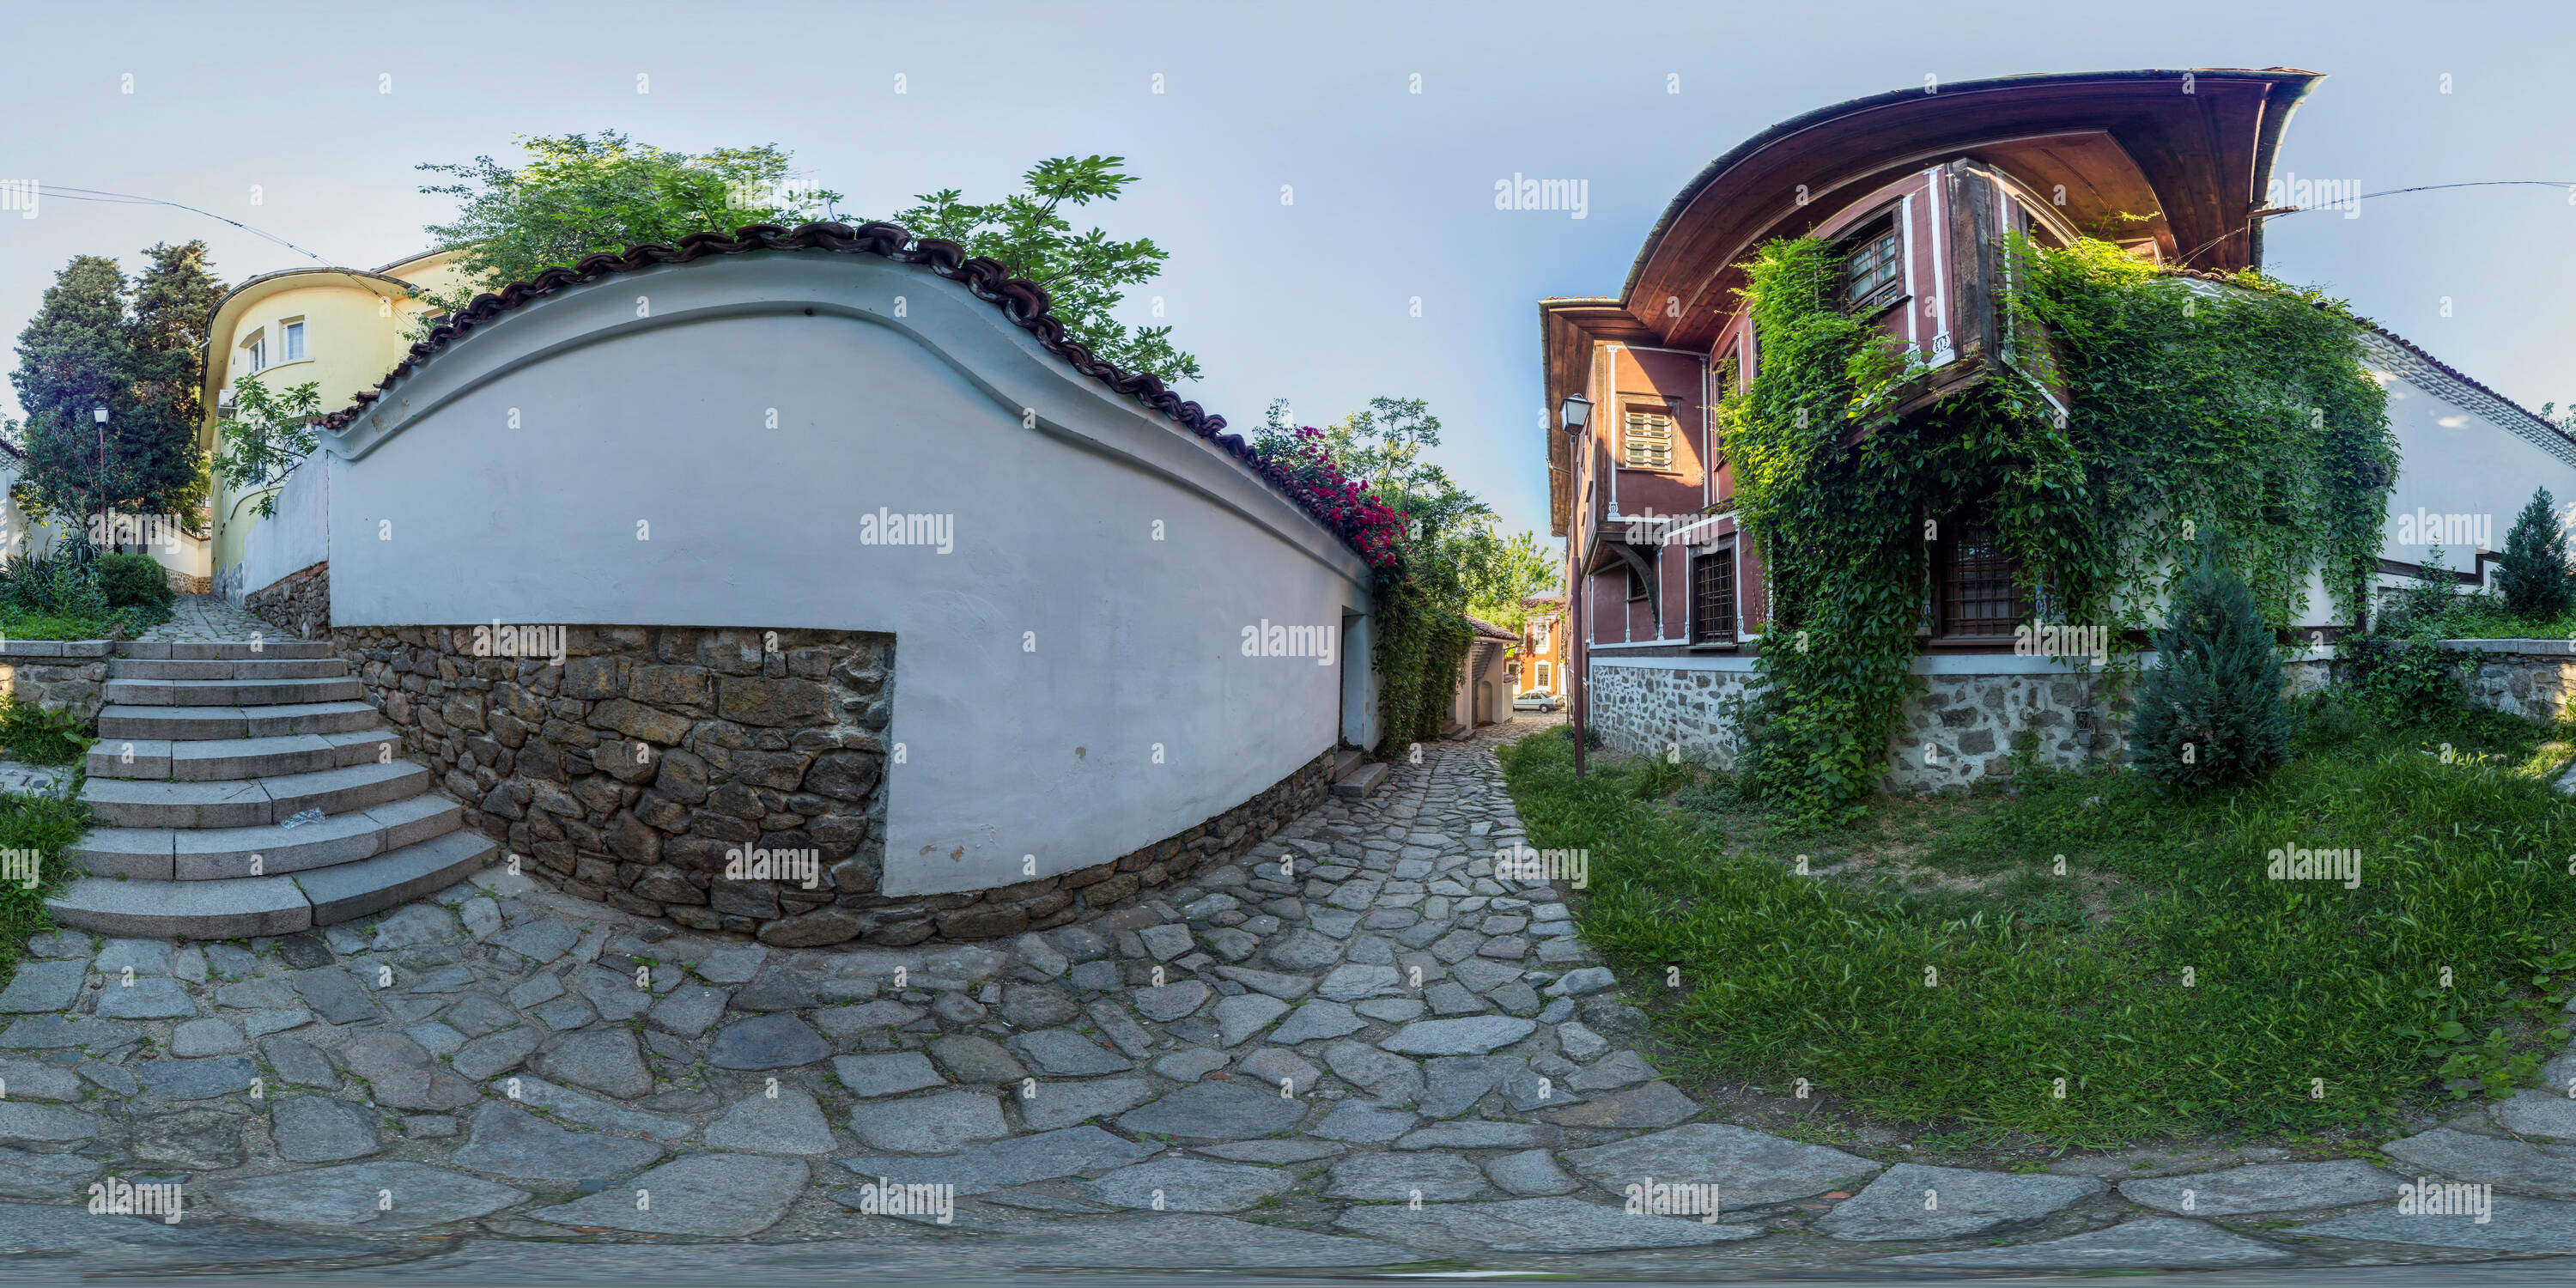 360 degree panoramic view of 380 by 180 degrees spherical panorama of Balabanov's house in the old town of Plovdiv, Bulgaria.